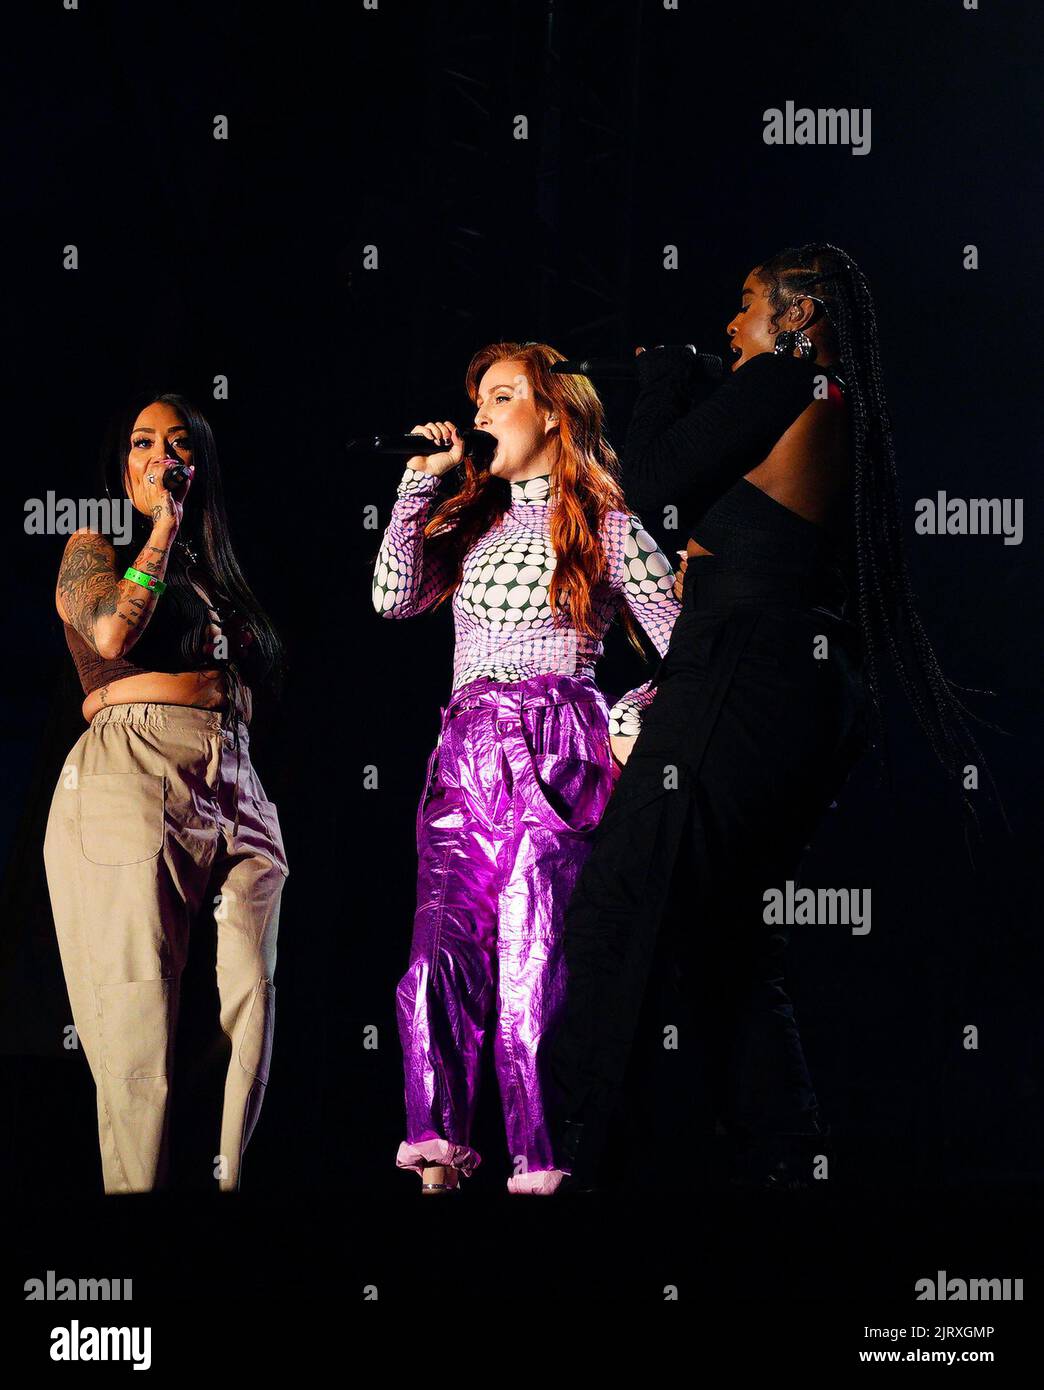 (Left to right) Mutya Buena, Siobhan Donaghy and Keisha Buchanan of Sugababes performing during The Big Feastival at Alex James' Farm in Kingham, near Chipping Norton, Oxfordhsire. Picture date: Friday August 26, 2022. Stock Photo